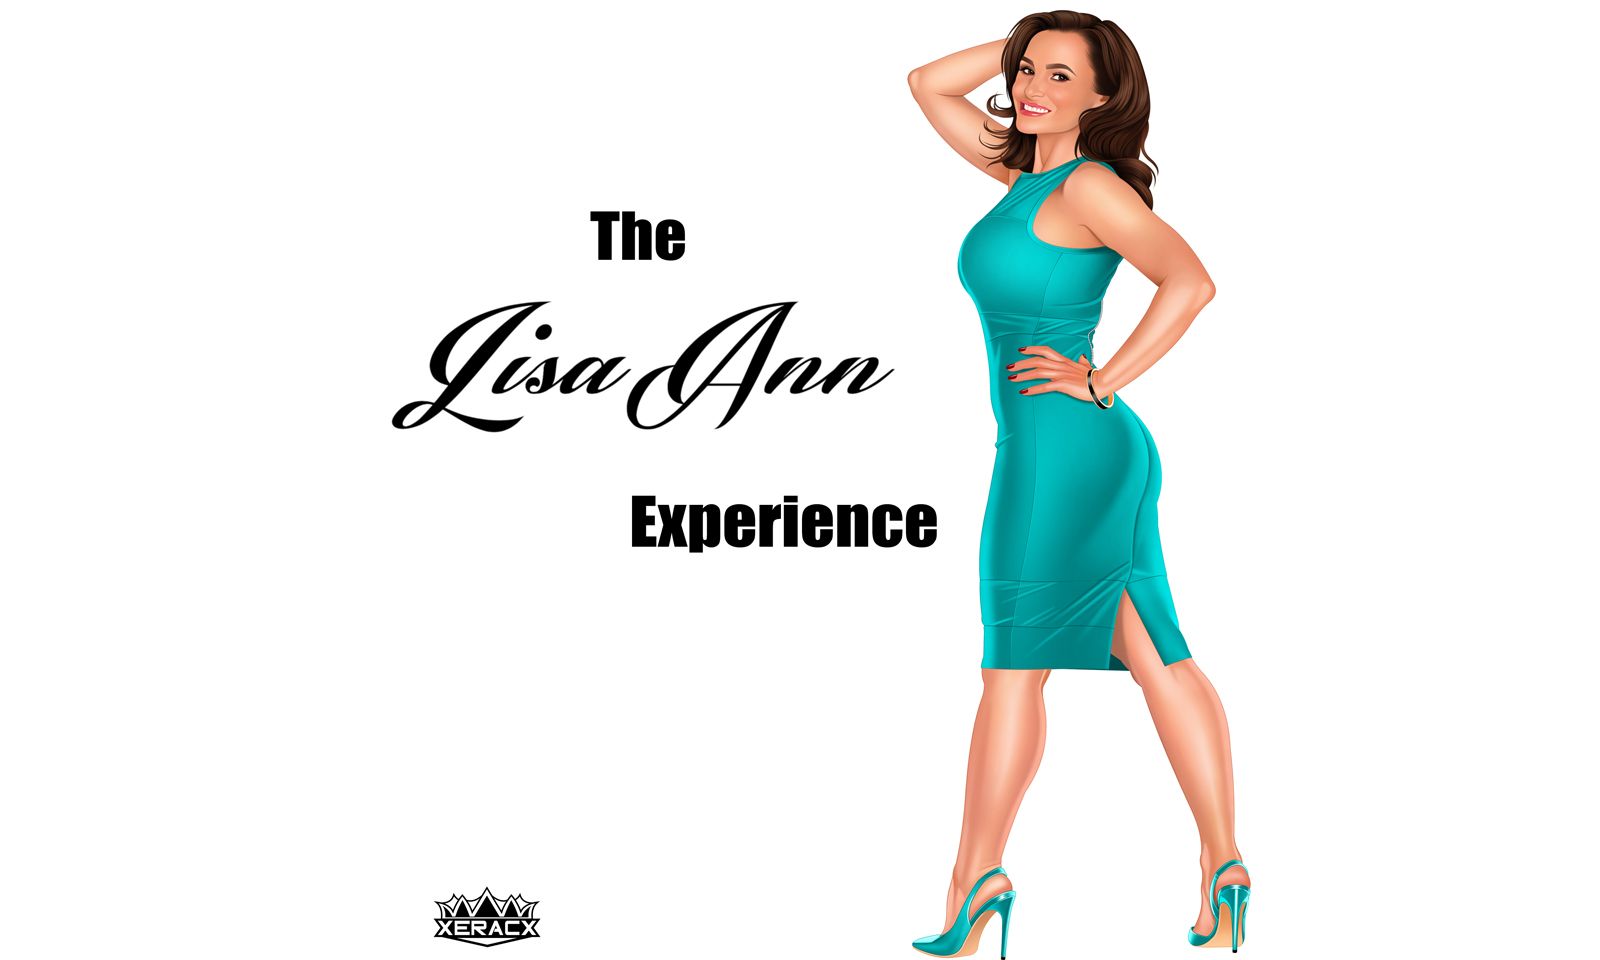 Lisa Ann Welcomes Sovereign Syre to 'The Lisa Ann Experience'